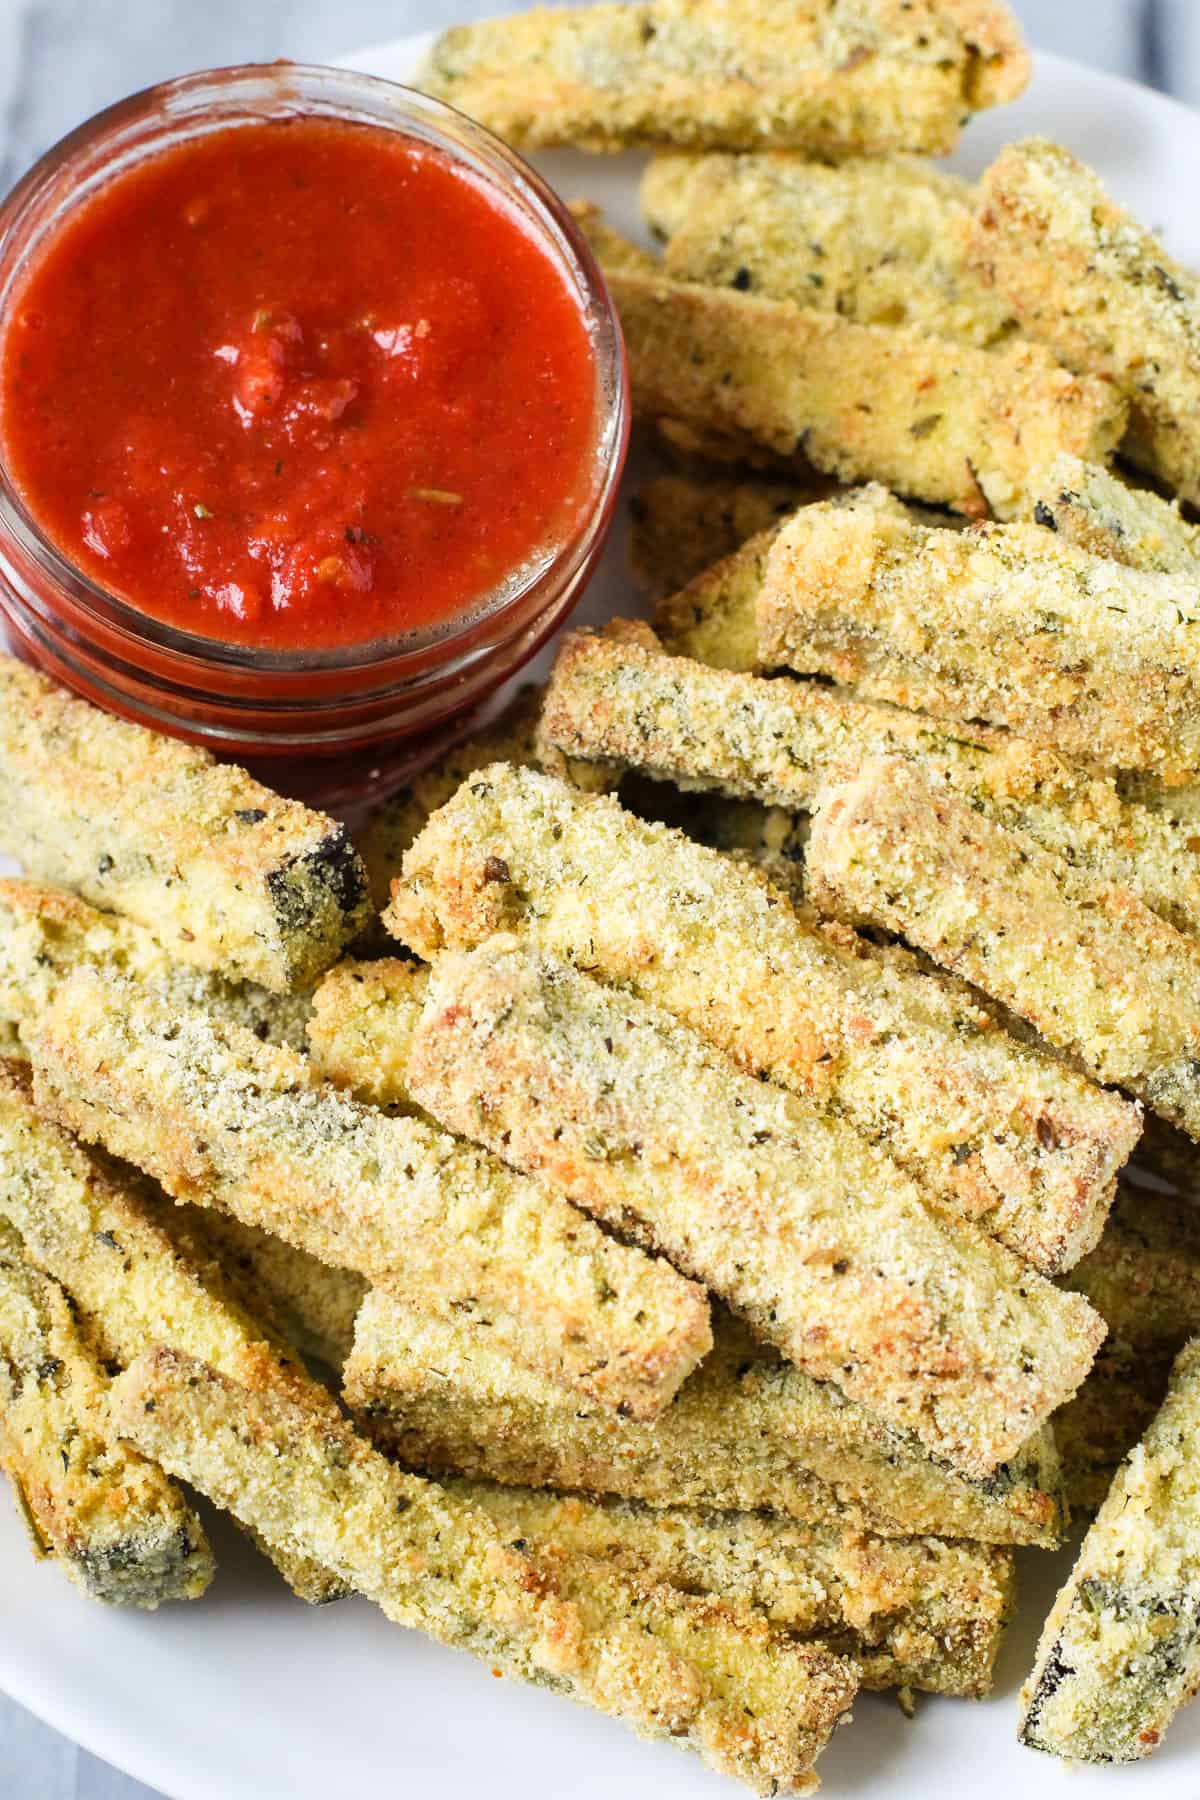 Oven baked eggplant fries.